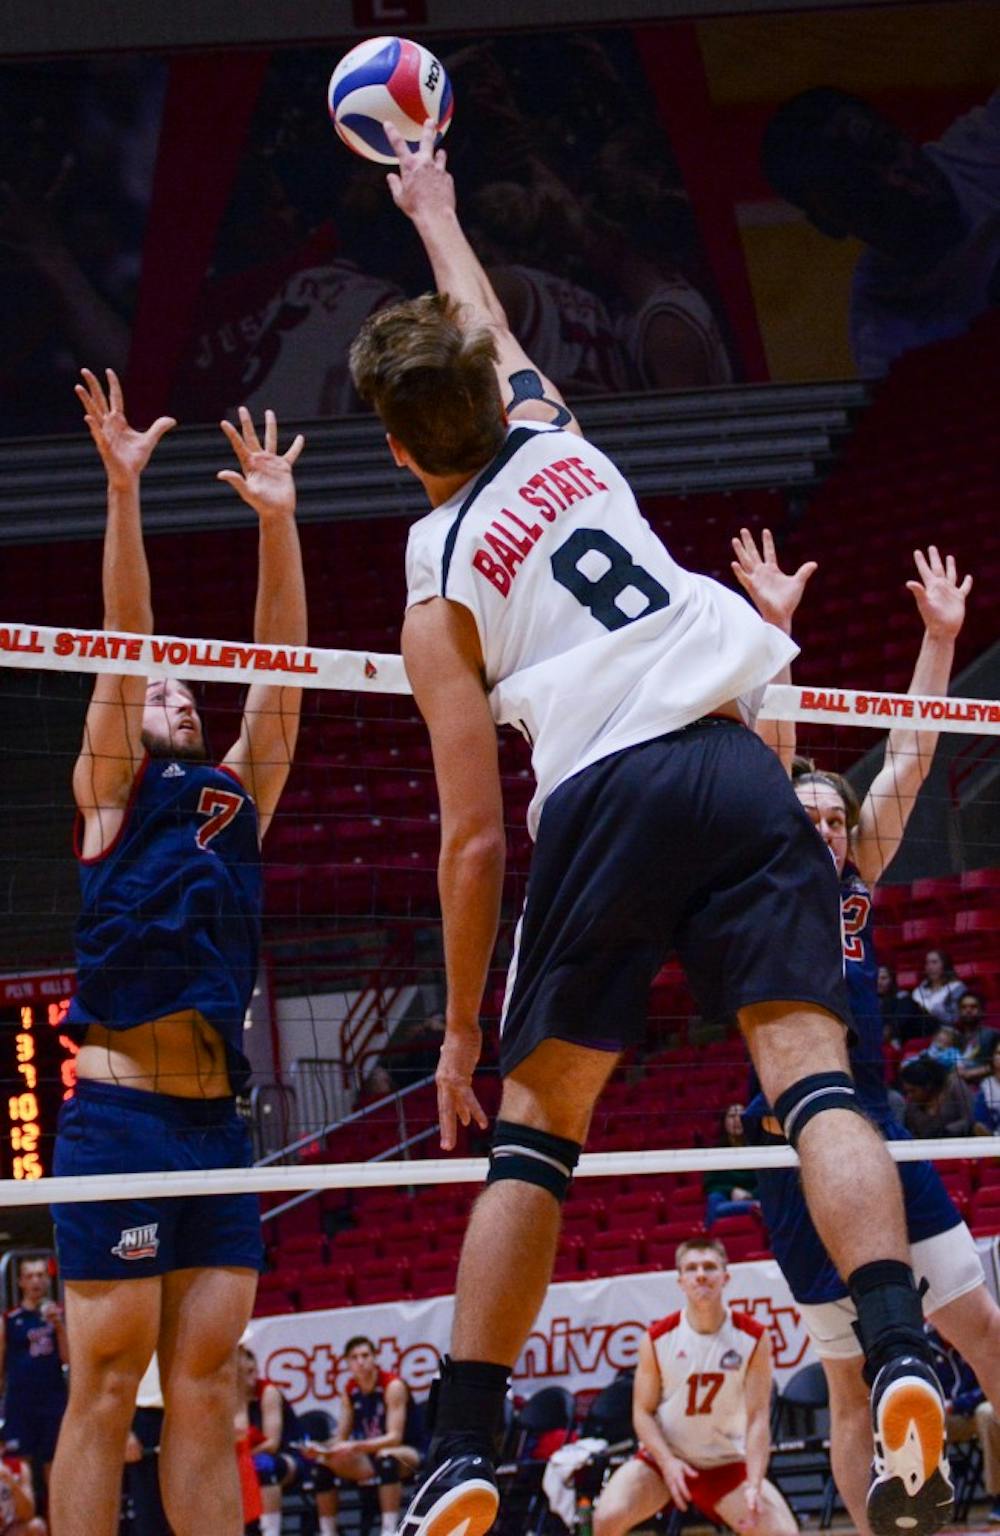 Freshman outside attacker Blake Reardon spikes the ball at the game against New Jersey Institute of Technology on Jan. 27 in John E. Worthen Arena. The Cardinals gained a 3-1 win improving to 8-1 this season. Kaiti Sullivan // DN